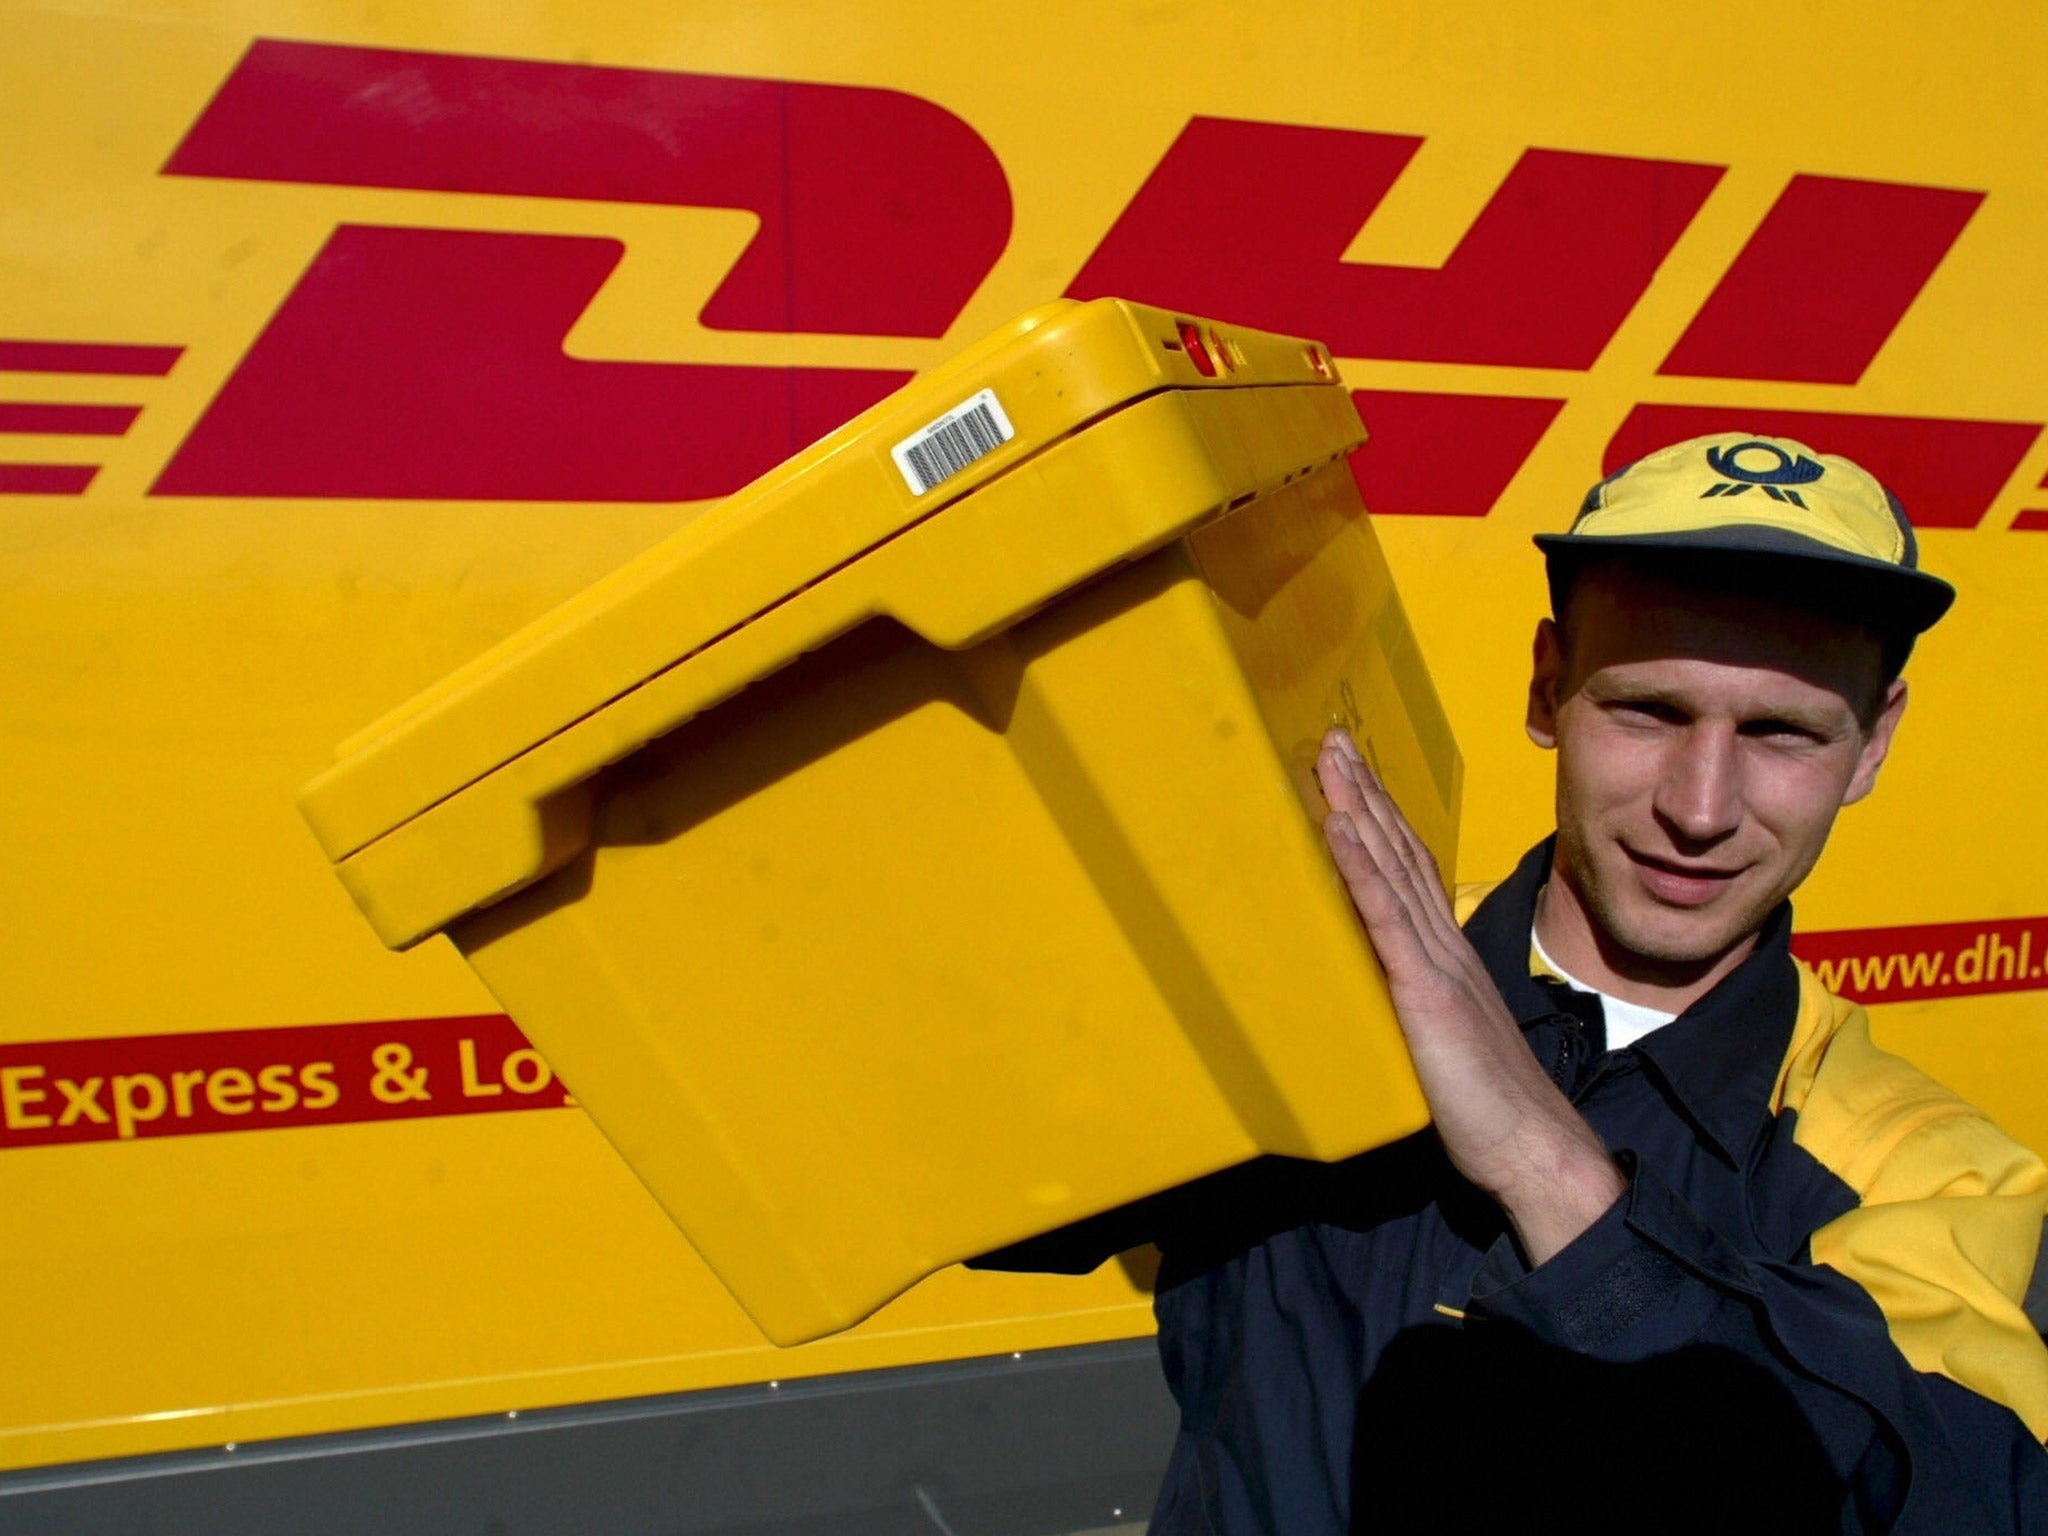 Stilted chats with DHL delivery men aside, Rhodri feels the absence of real interaction